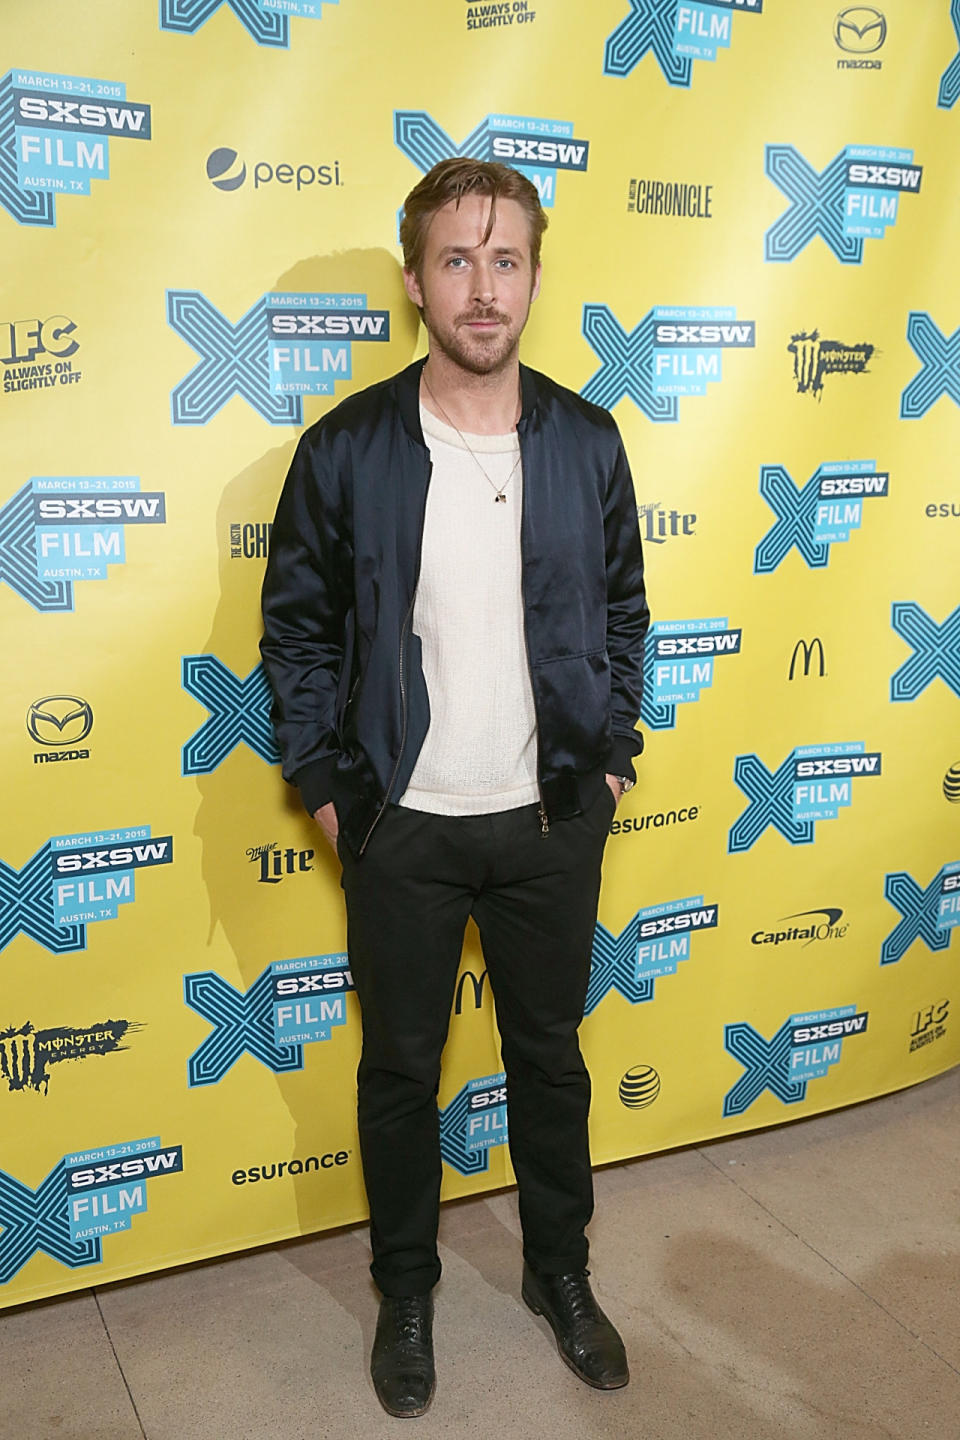 Making his directorial debut for his new film “Lost River,” Gosling couldn’t shake his leading man looks in a satin bomber jacket, white T-shirt, and black pants.